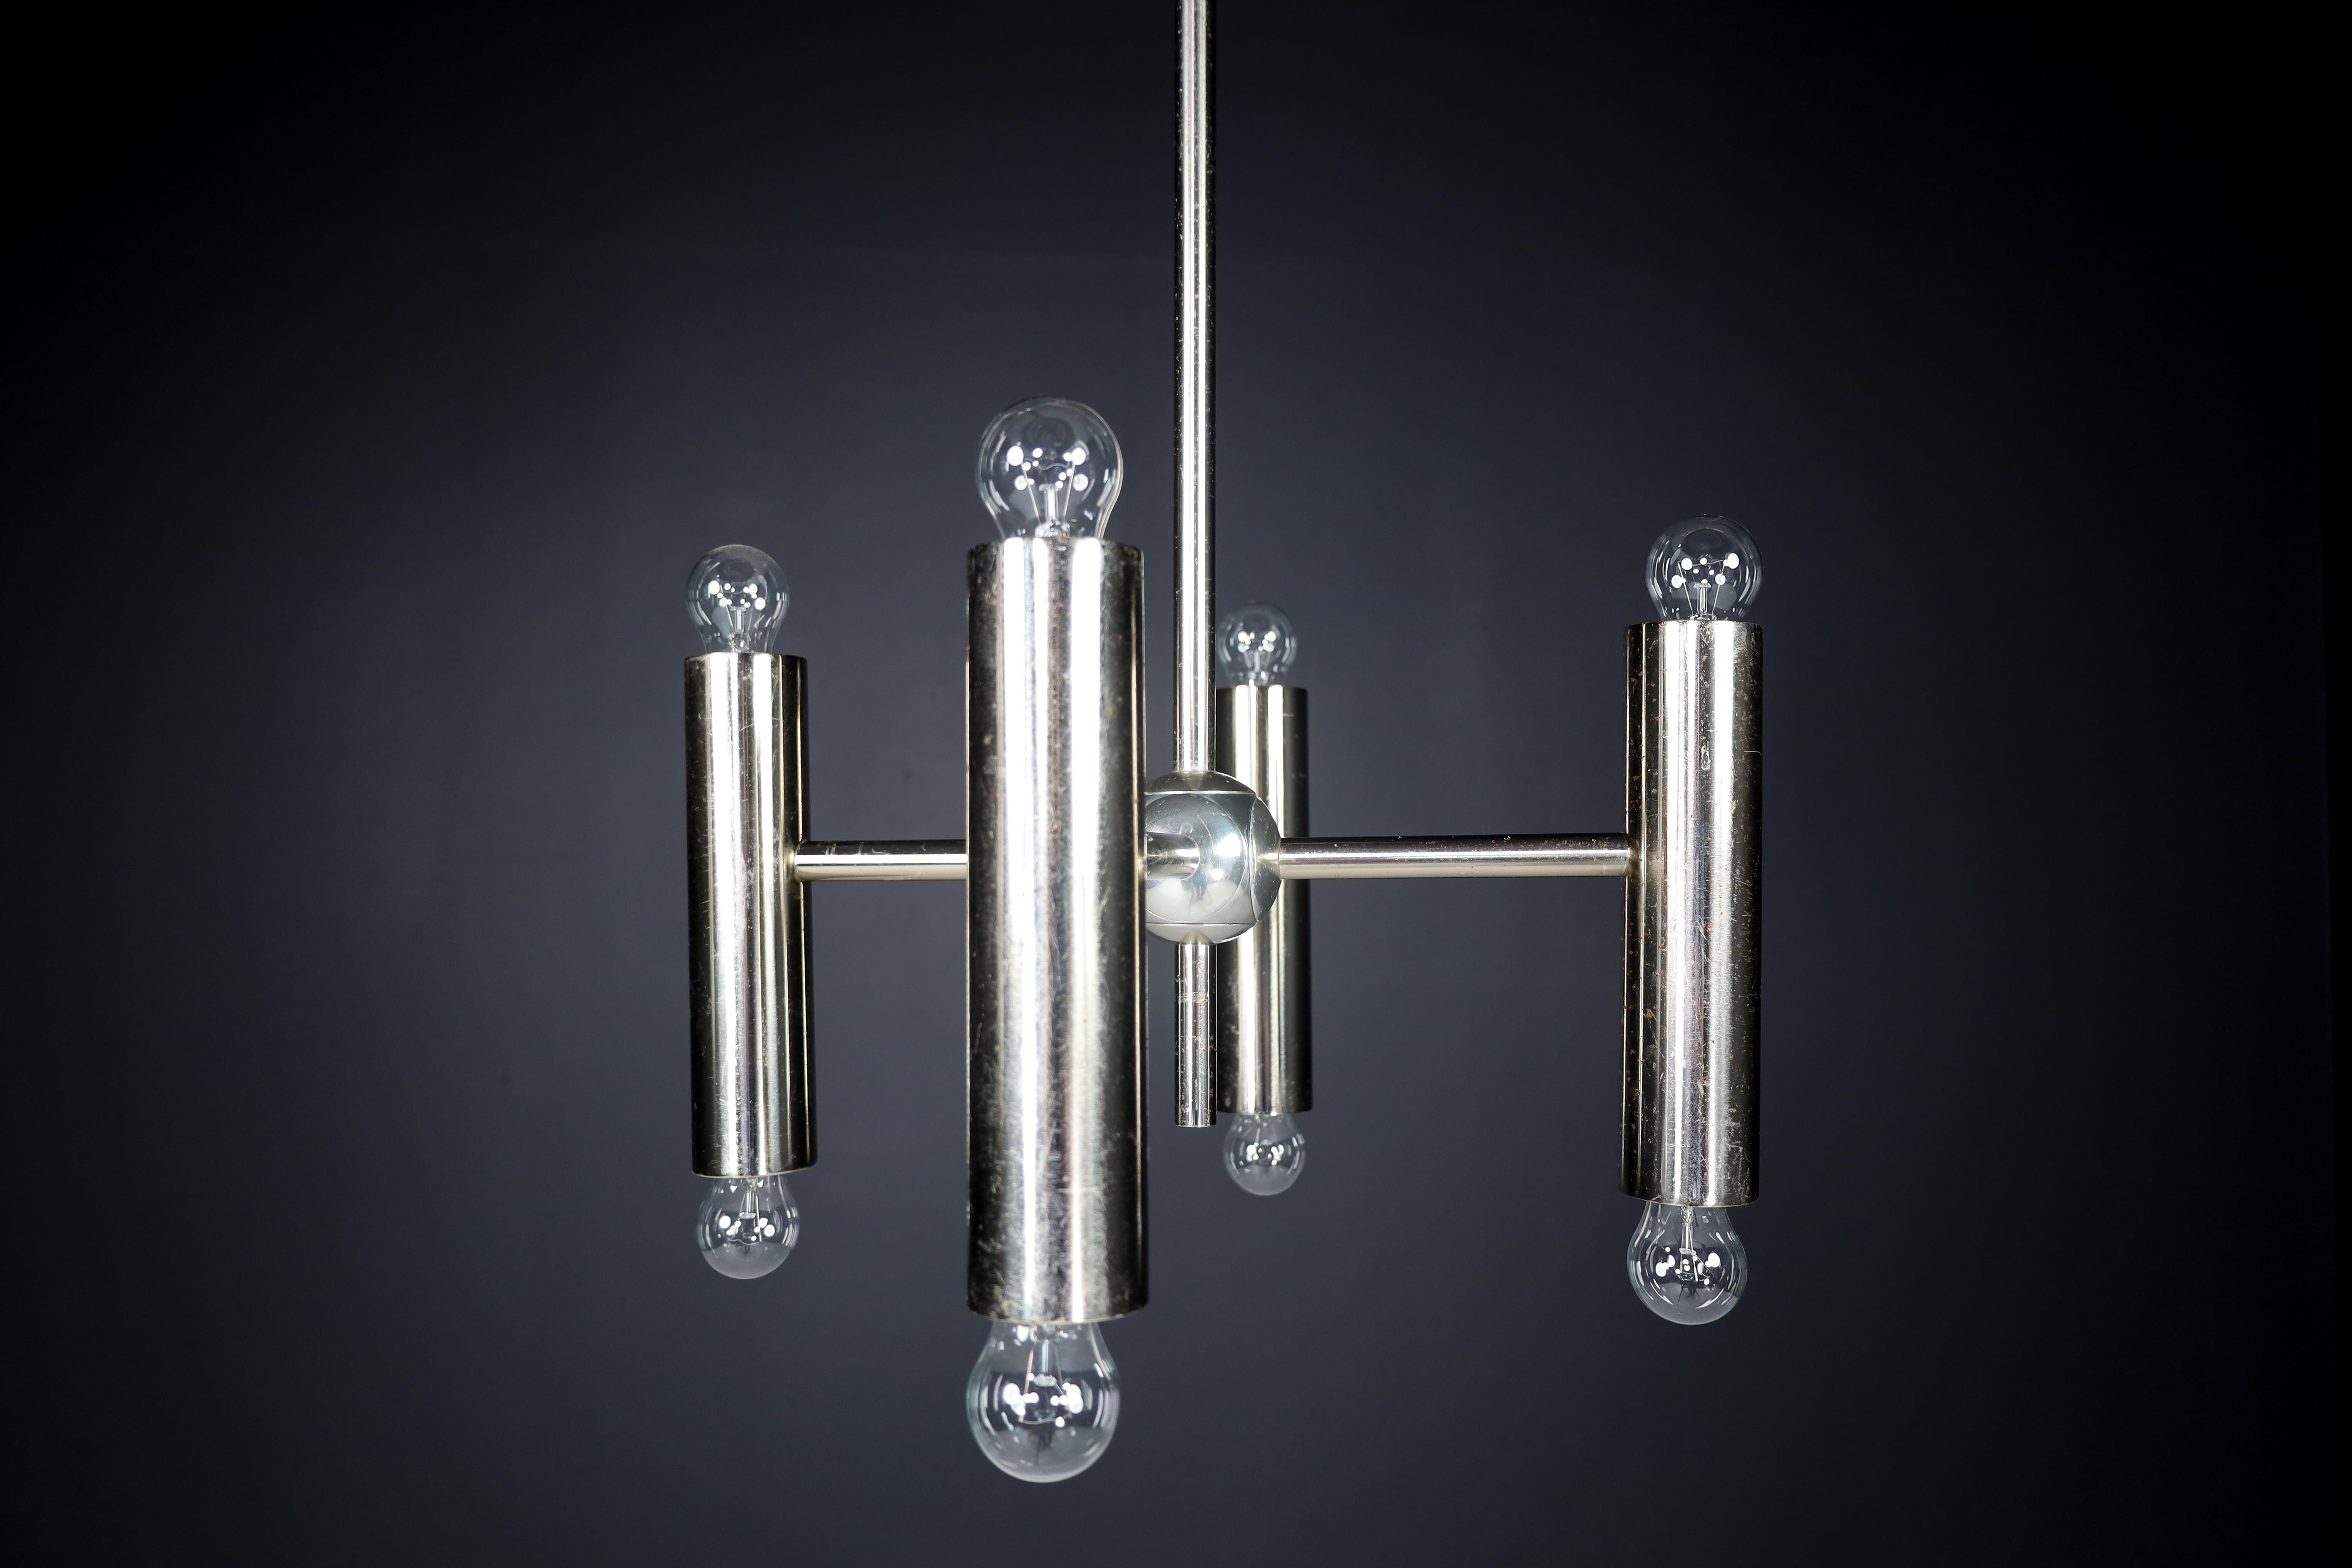 Steel 1 of 6 Minimalistic Design Geometric Chandeliers in Chrome, Germany, 1970s For Sale